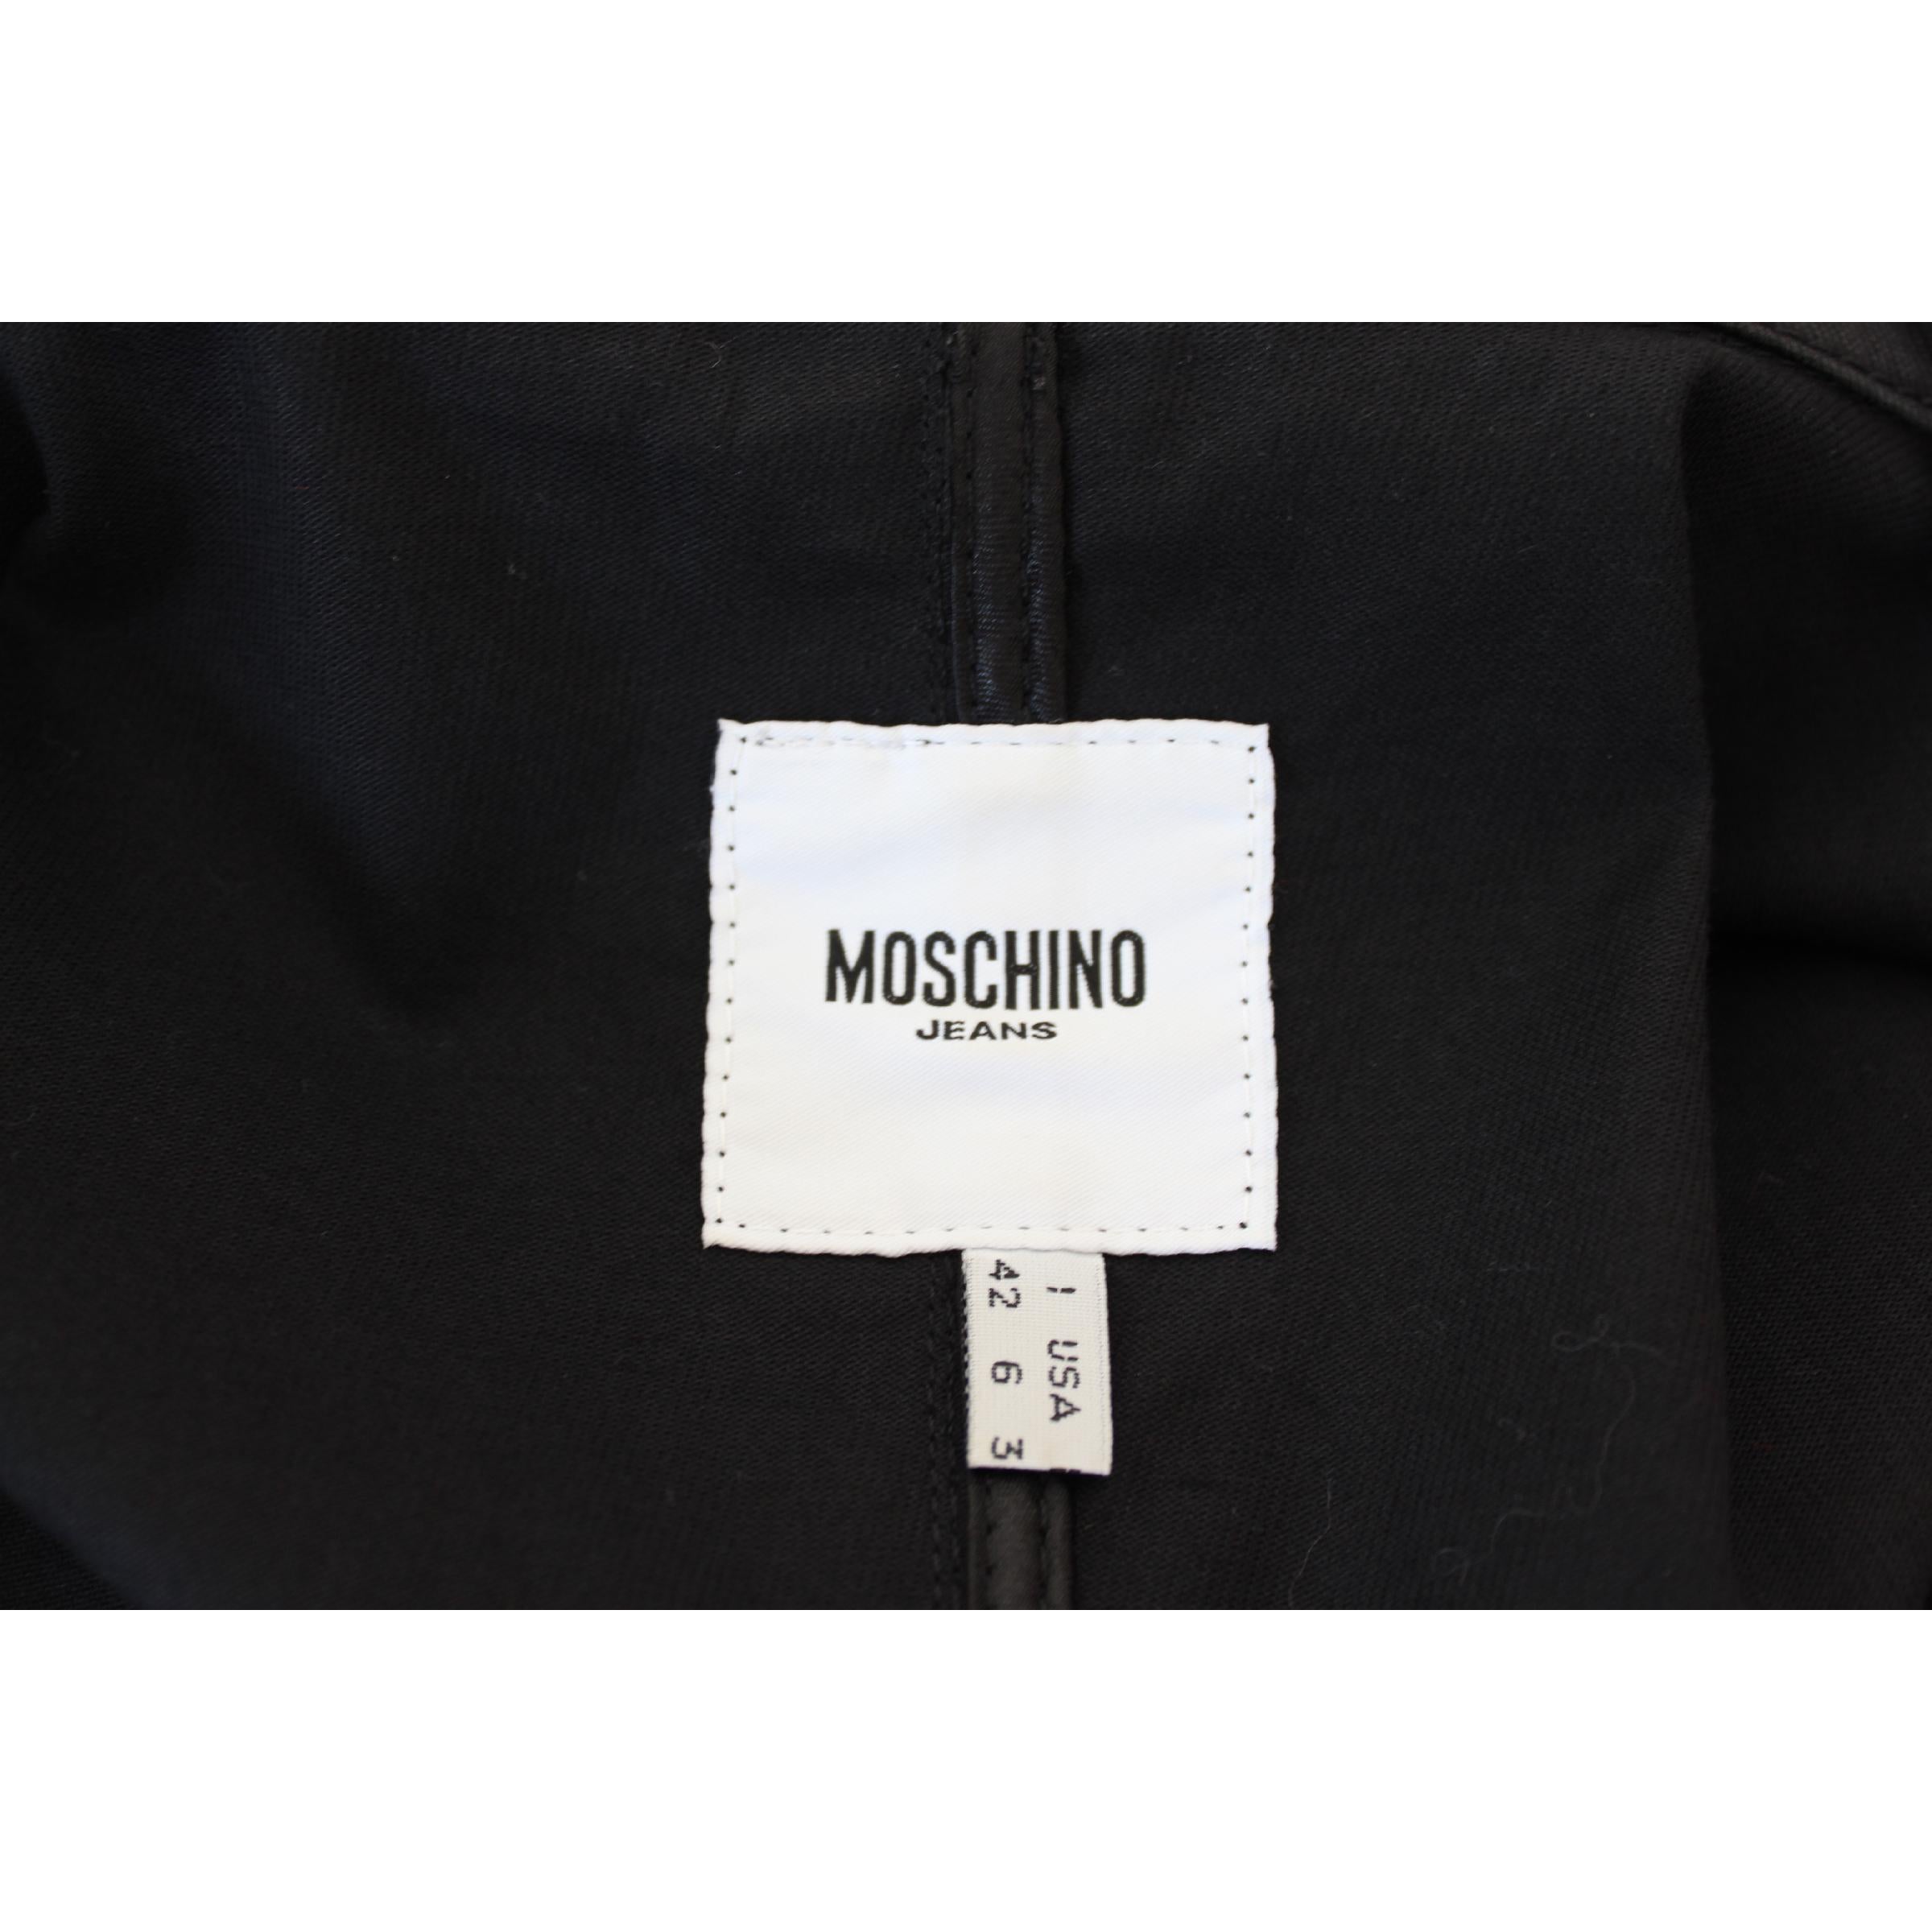 Moschino Black Cotton Jeans Jacket Studs Button Heart Shape 1990s 3/4 Sleeves 2